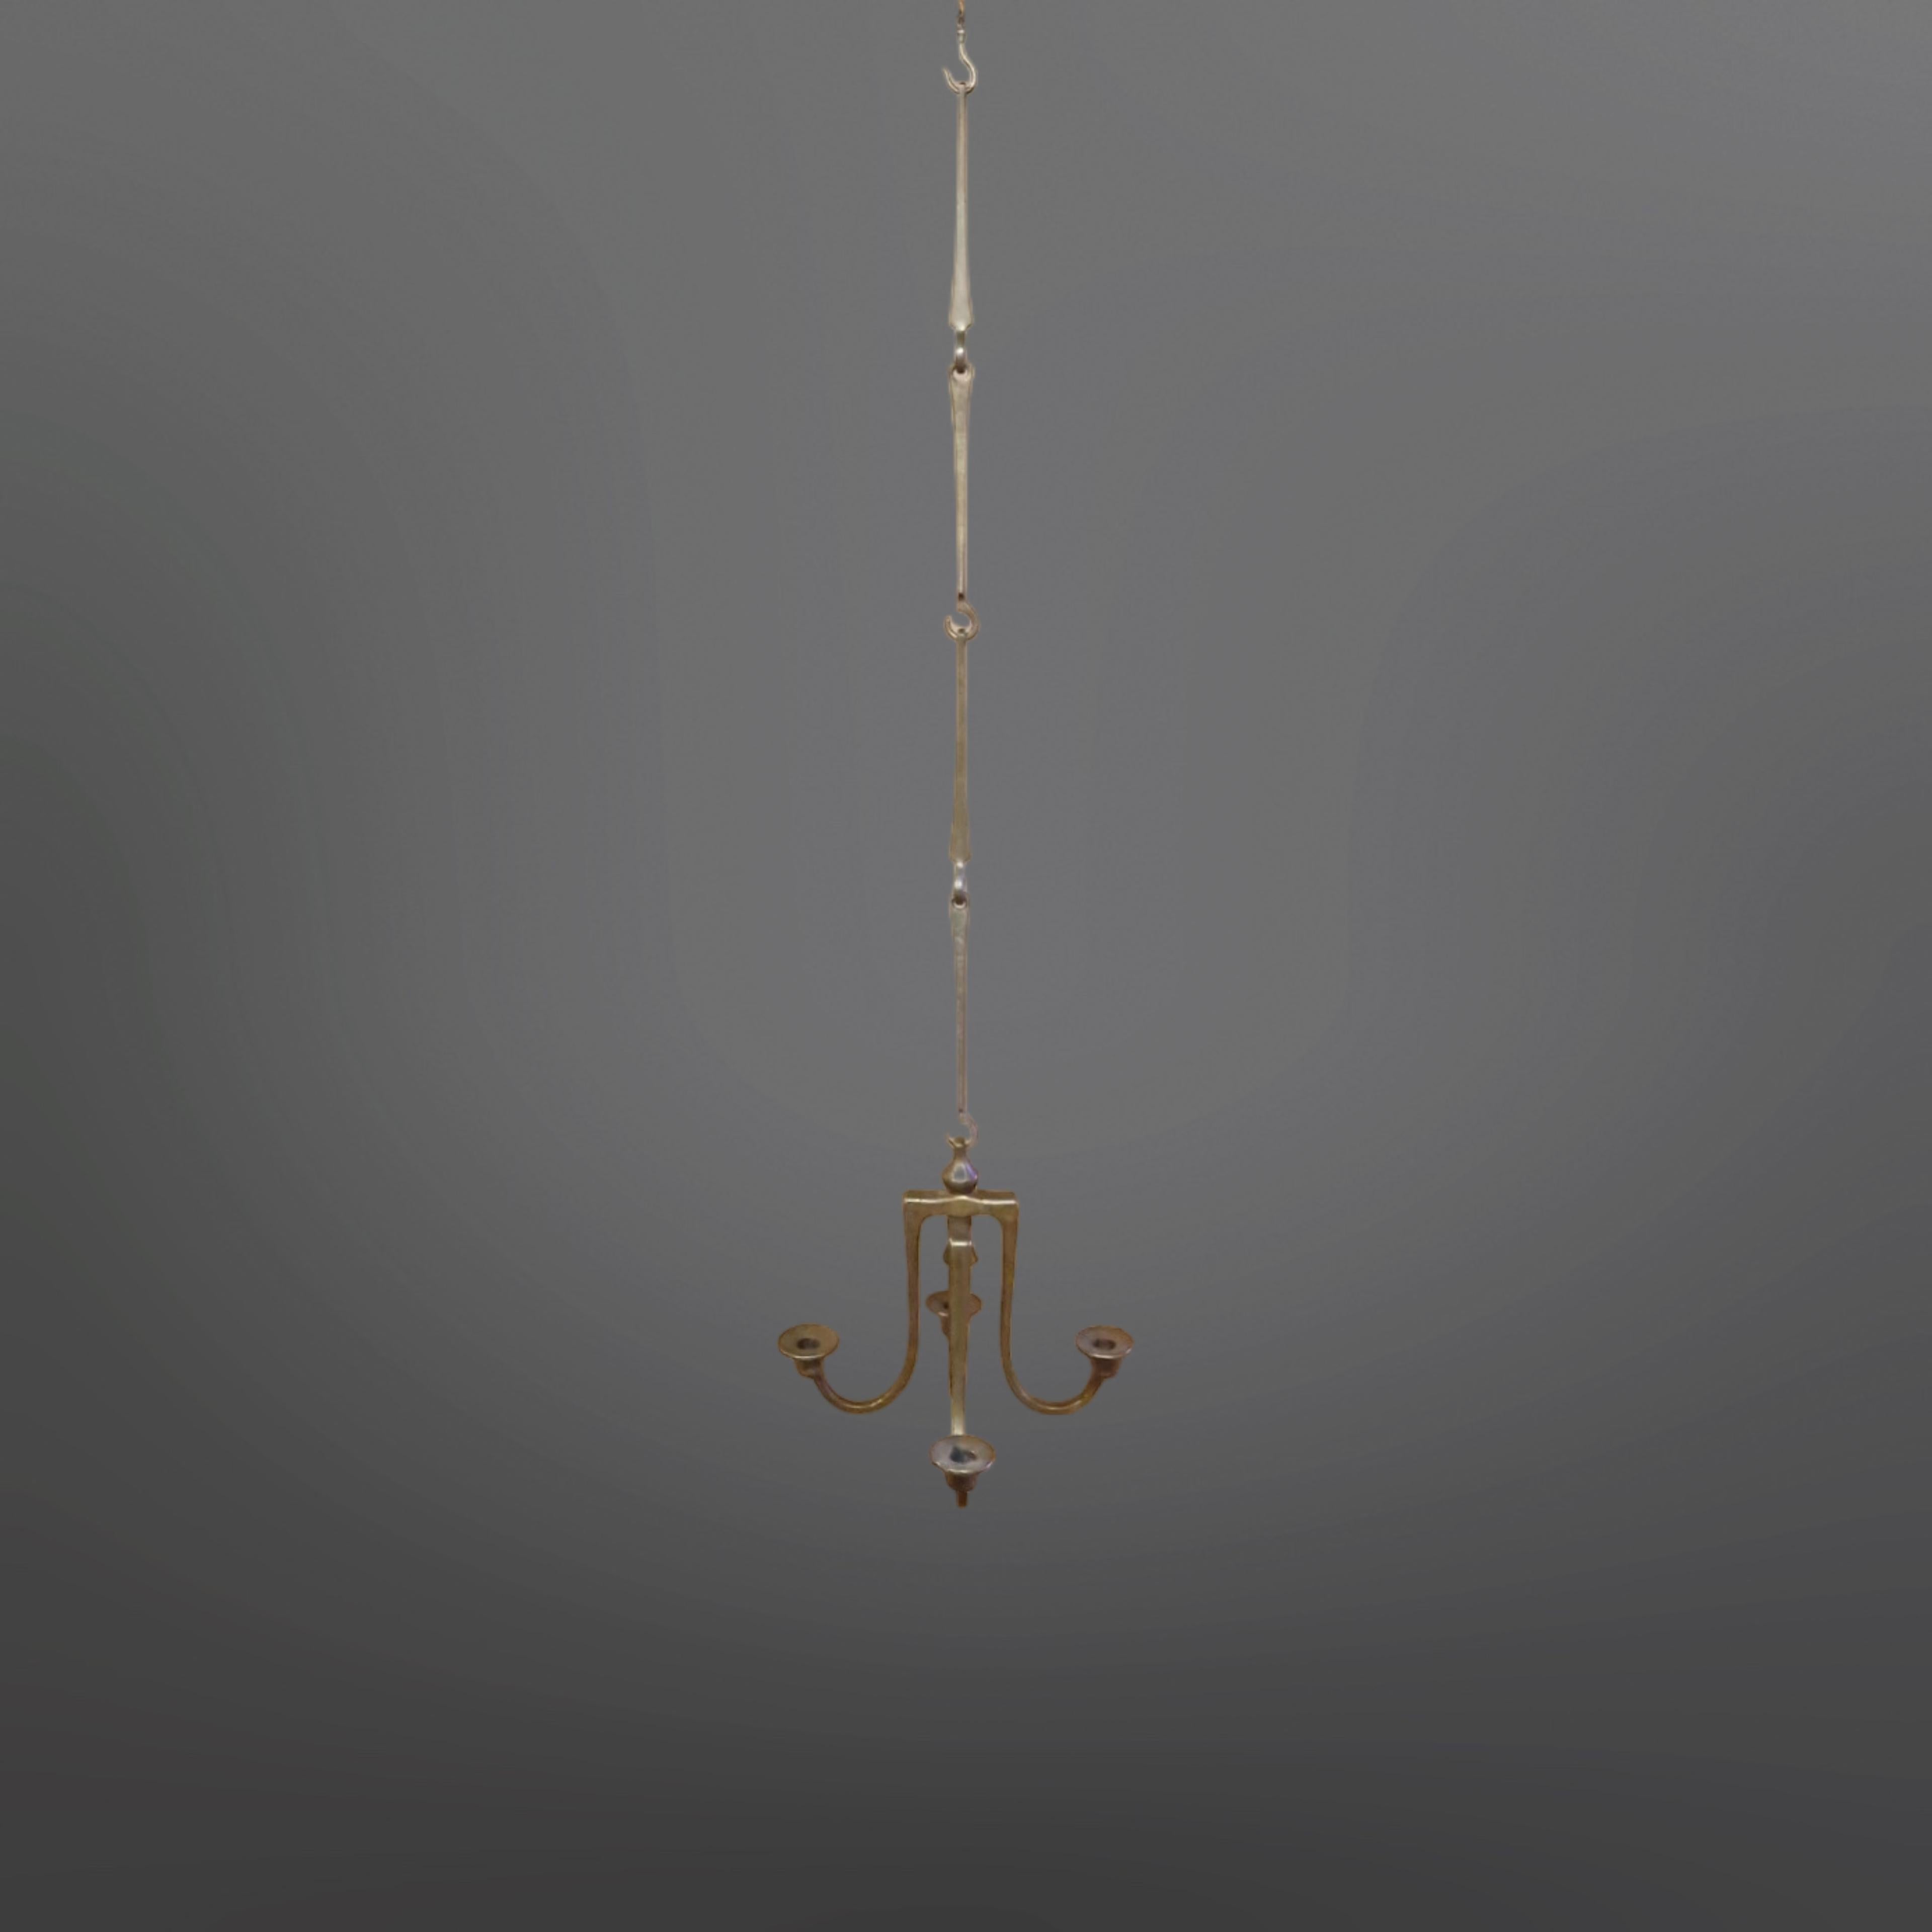 Cast bronze candelabra. It has 4 arms that are set on a central rod. The arms can rotate around the rod. At the bottom it is capped with a cast bronze cap and at the top it has a cast bronze cap with an eye. It comes with 4 cast bronze suspension